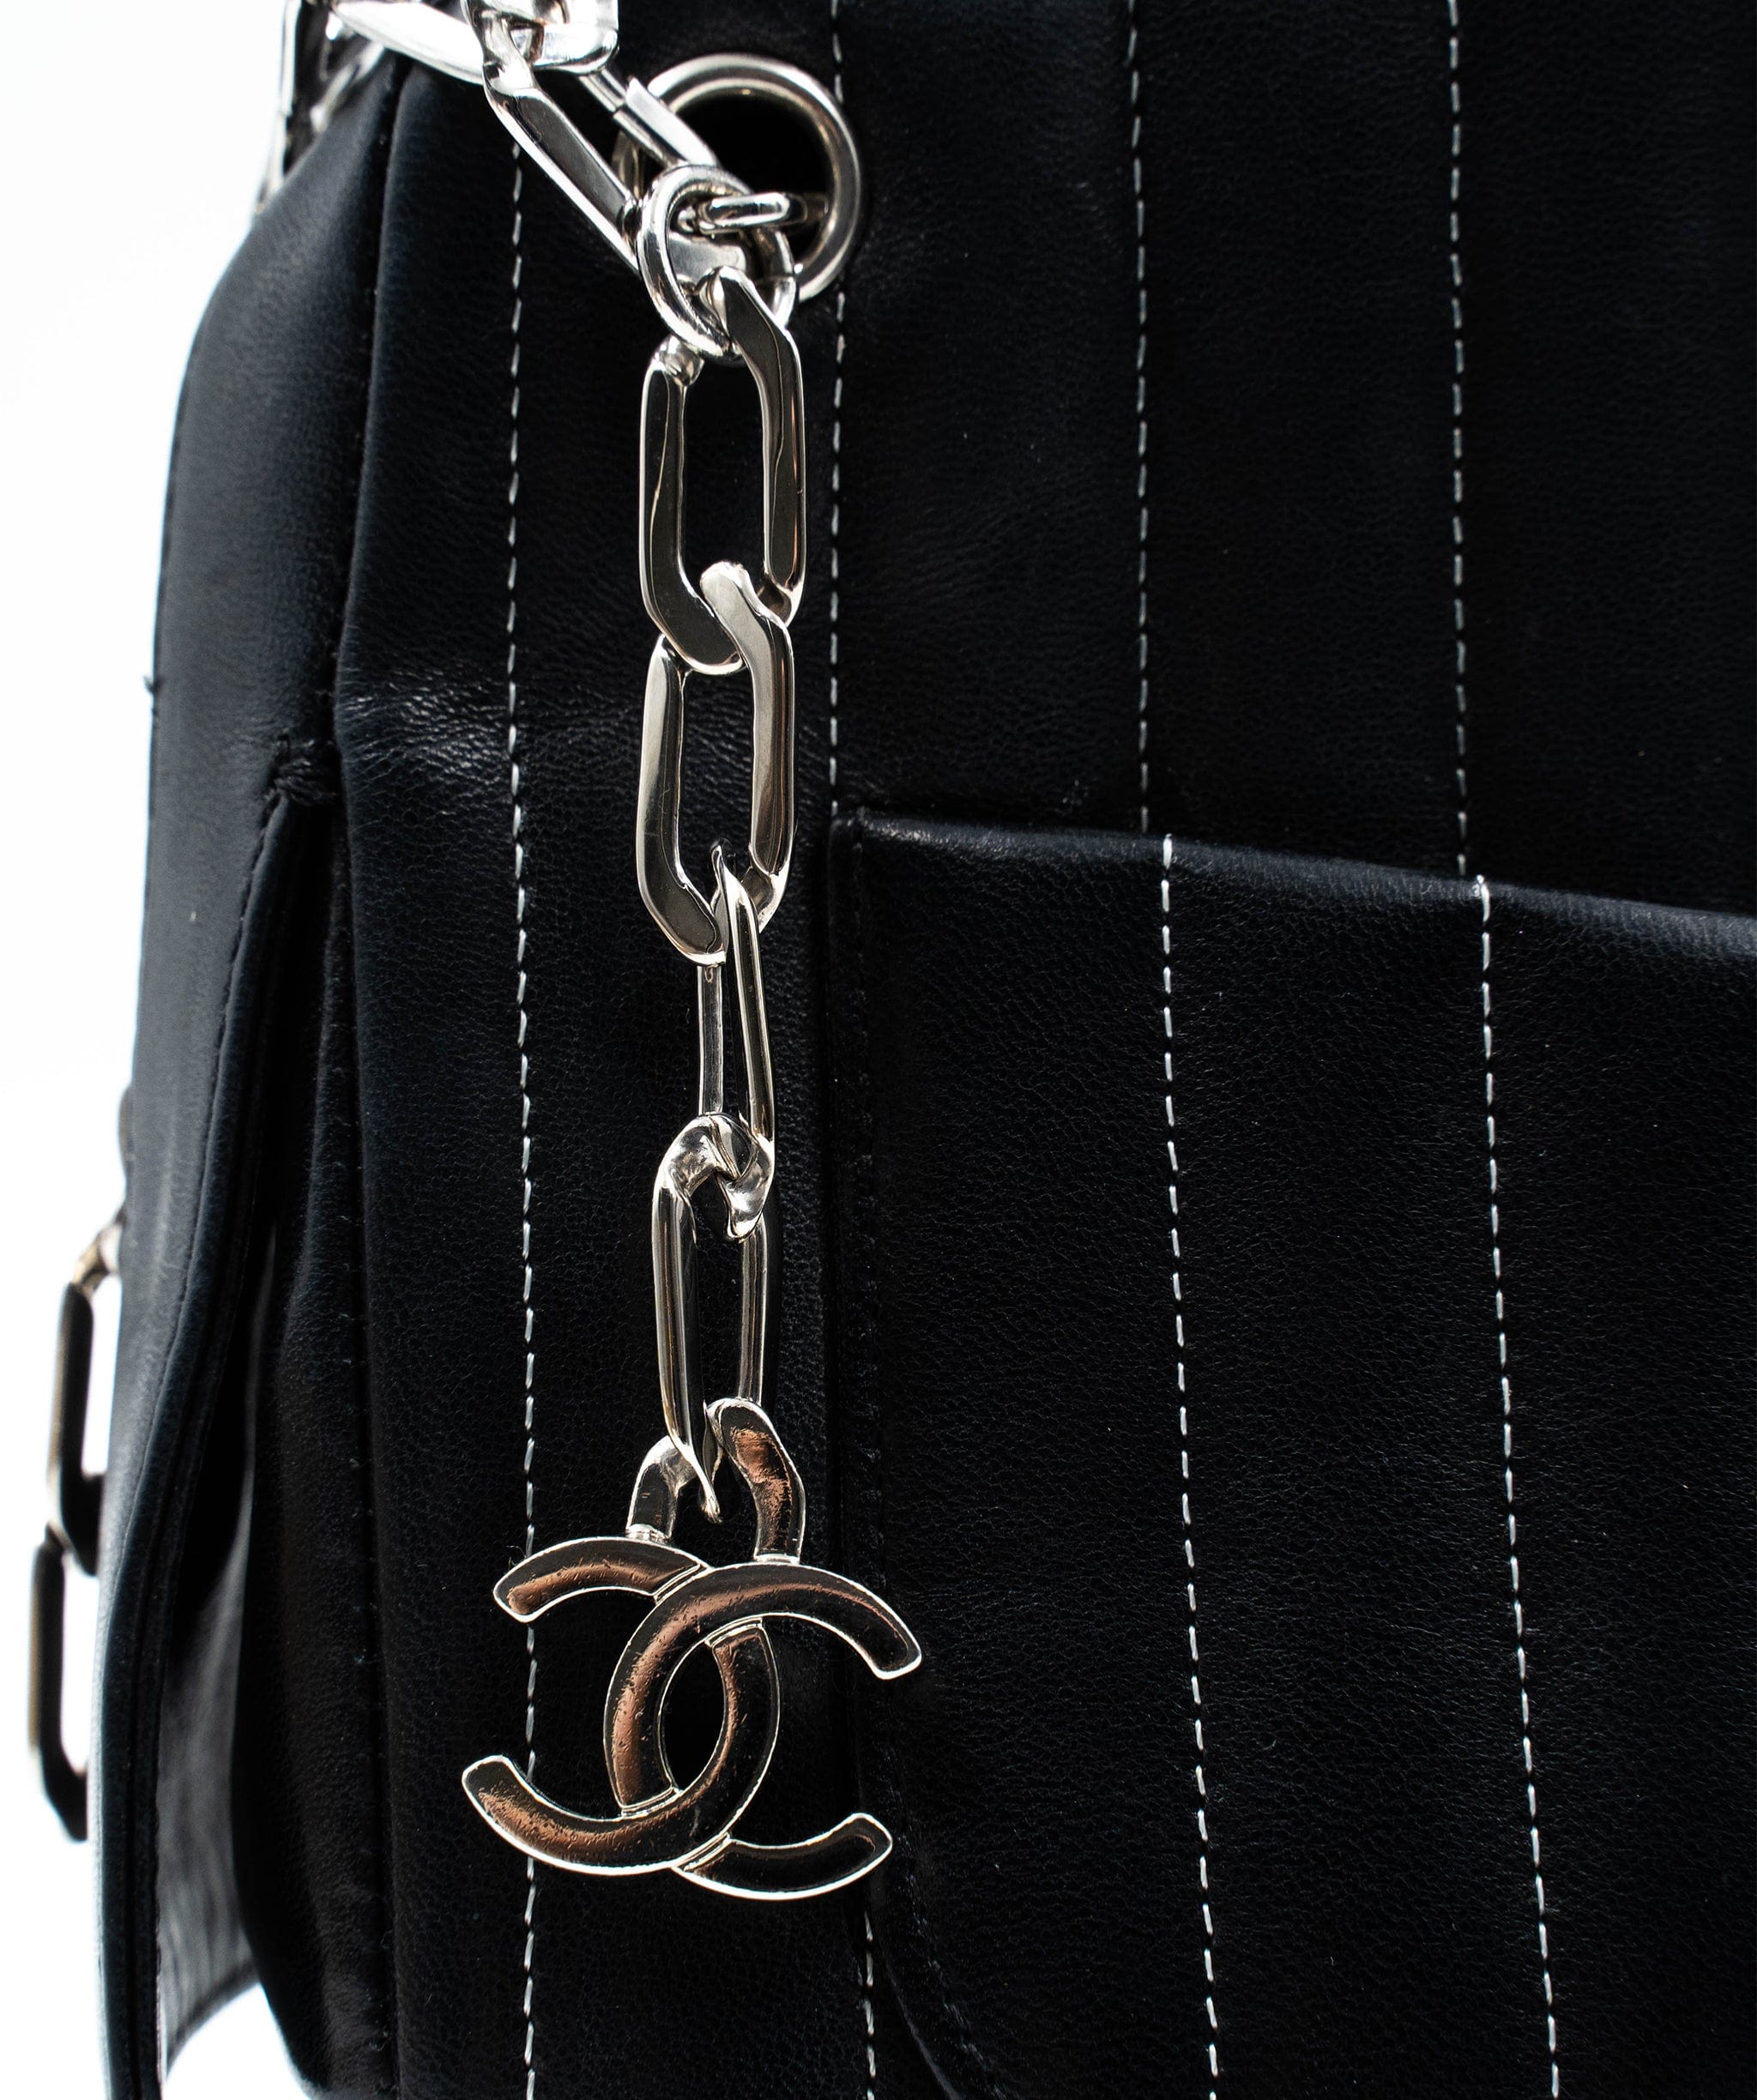 Chanel Chanel Mademoiselle Black bag with silver hardware - AWC1180